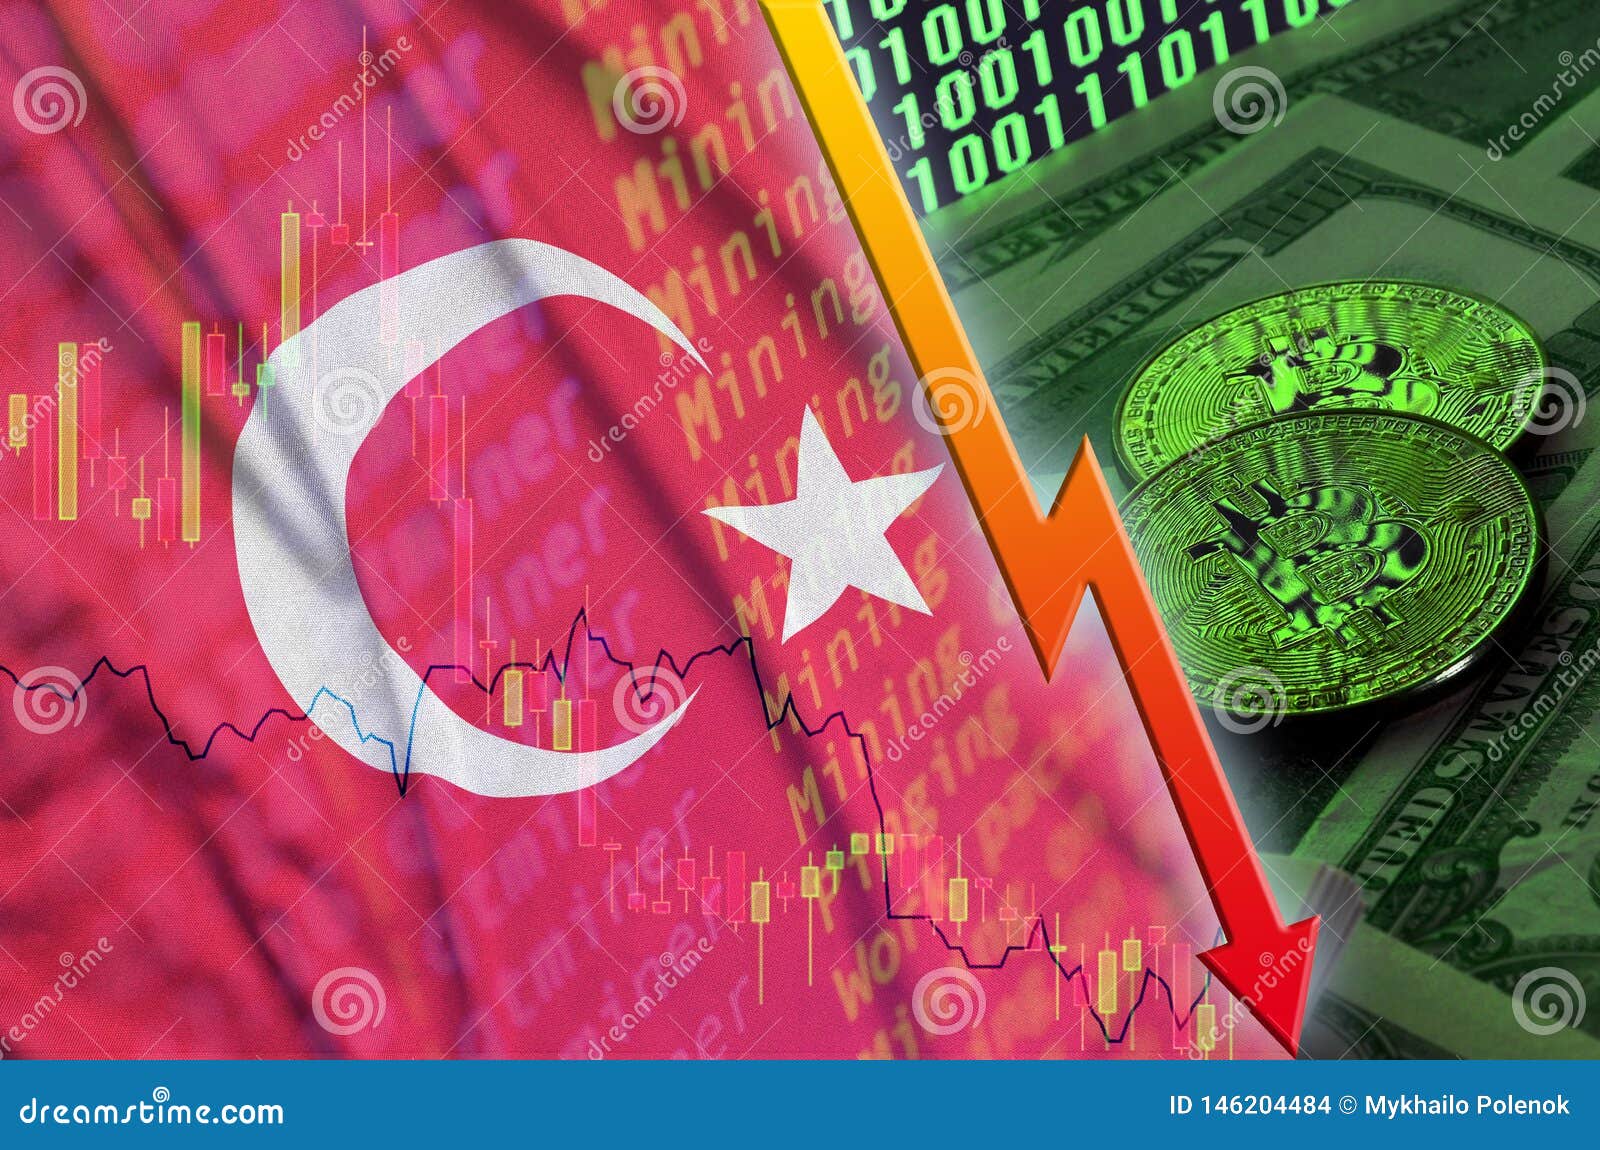 Turkey Flag And Cryptocurrency Falling Trend With Two ...